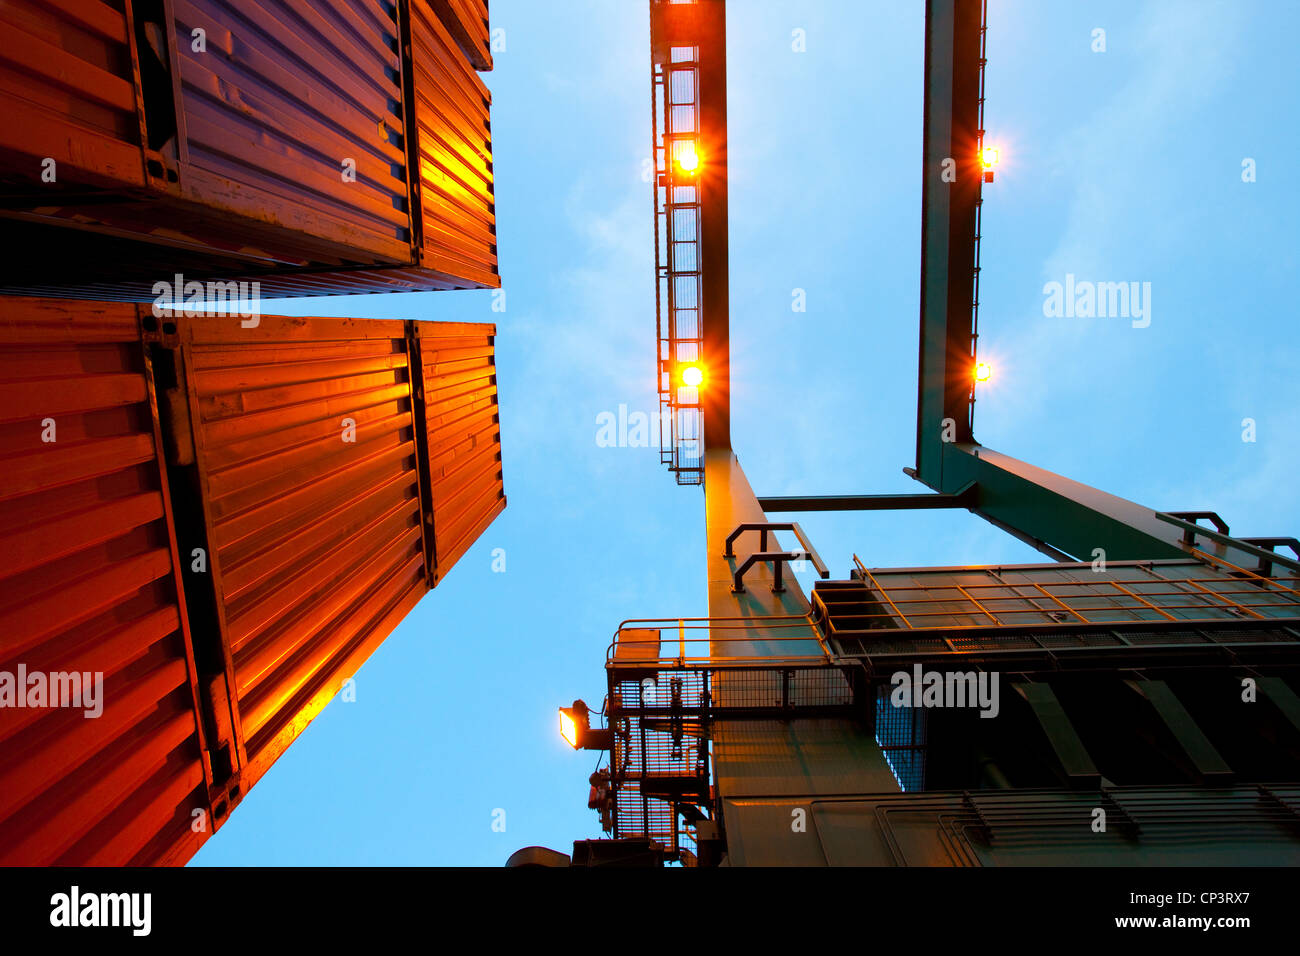 Bottom view of cranes and stack of cargo containers Stock Photo